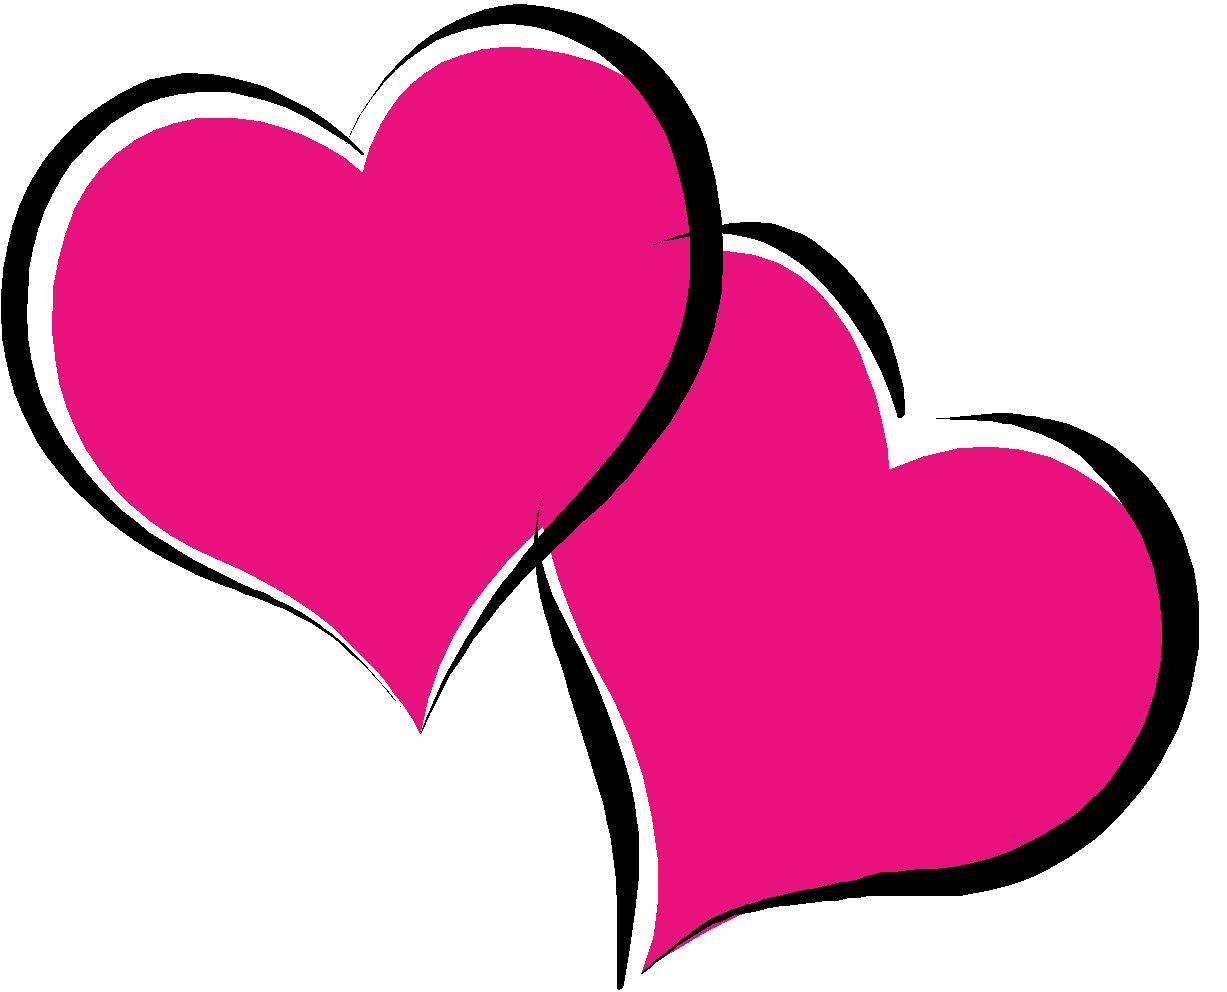 Hearts heart clipart free clipart images 